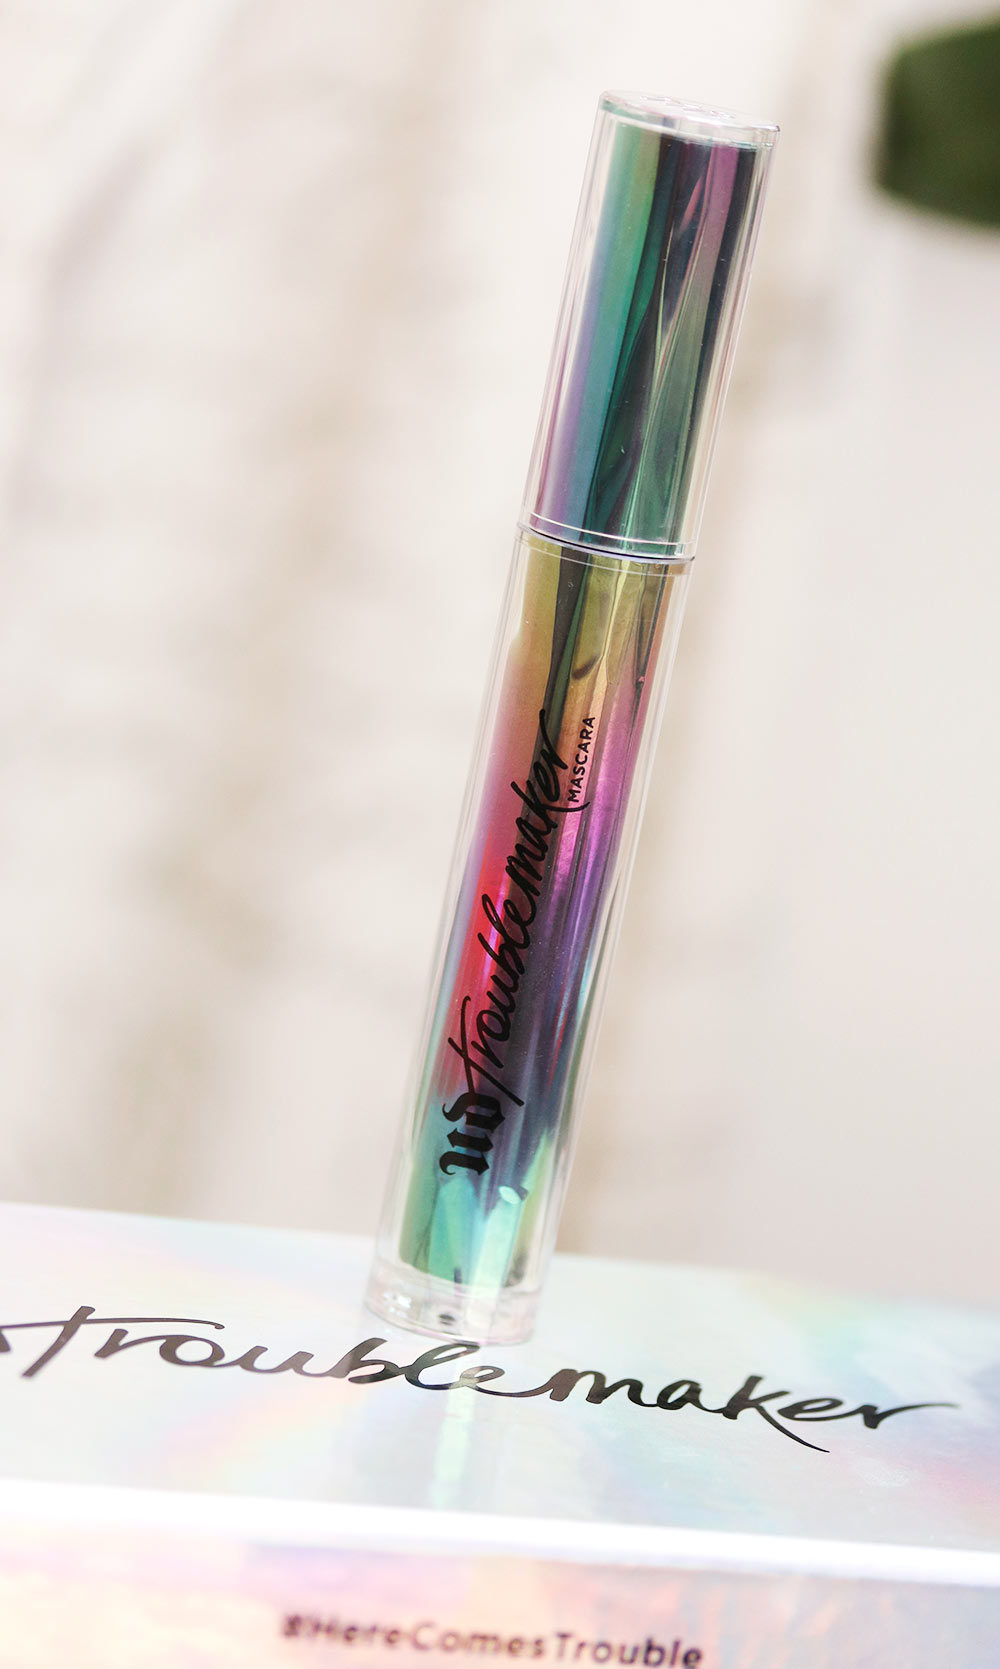 Urban Decay Troublemaker Mascara For Lash Lengthening That